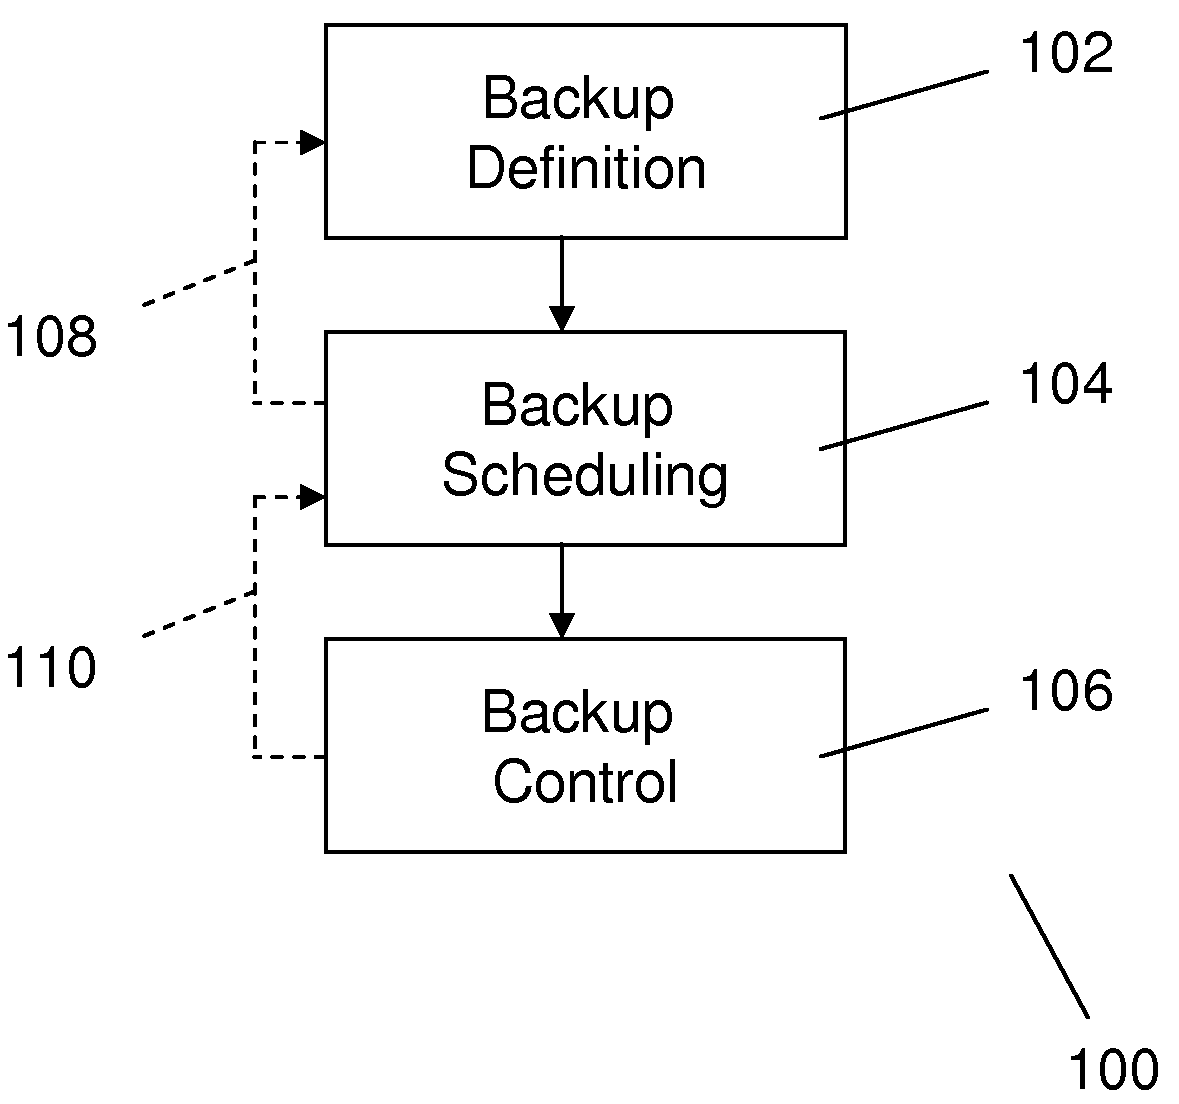 Method and System for Scheduling and Controlling Backups in a Computer System